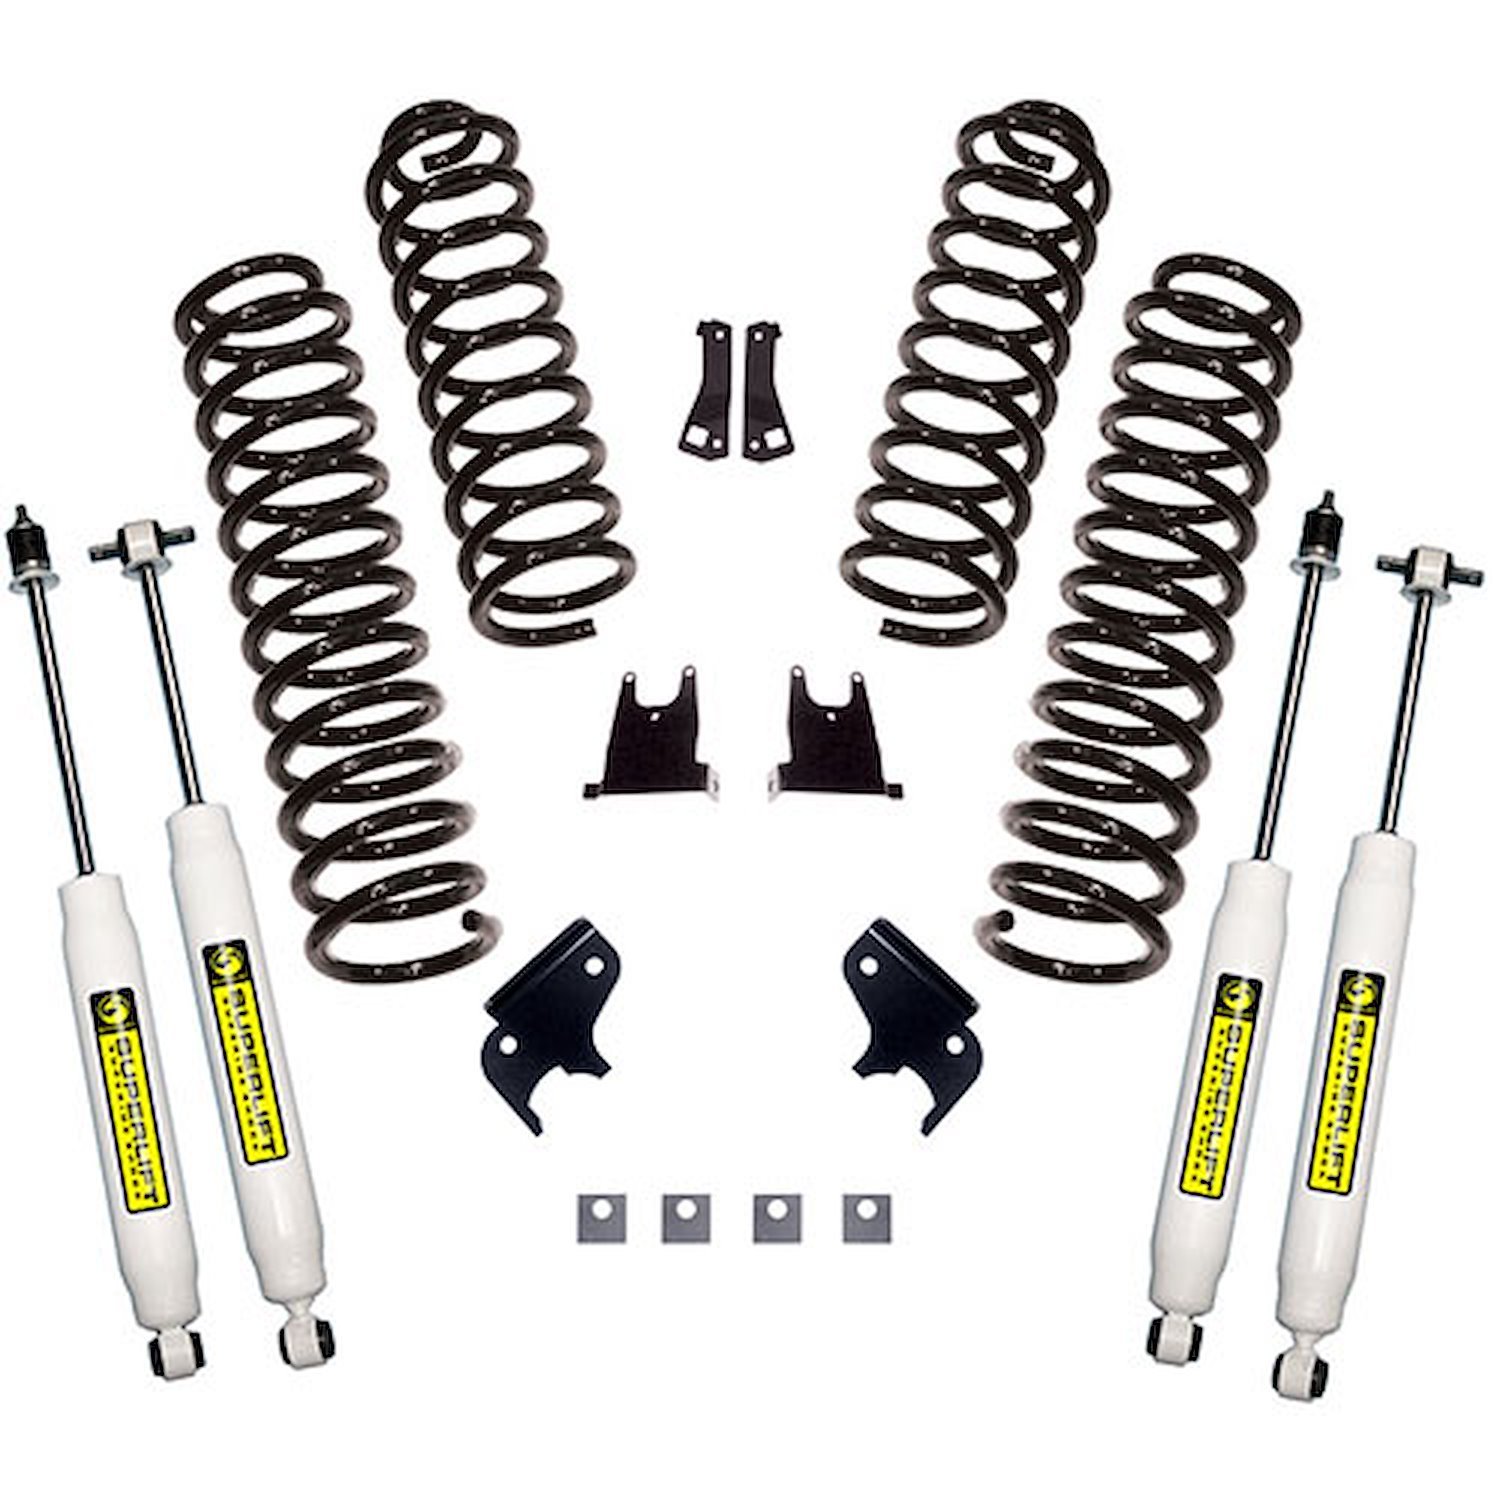 K931 Front and Rear Suspension Lift Kit, Lift Amount: 2.5 in. Front/2.5 in. Rear